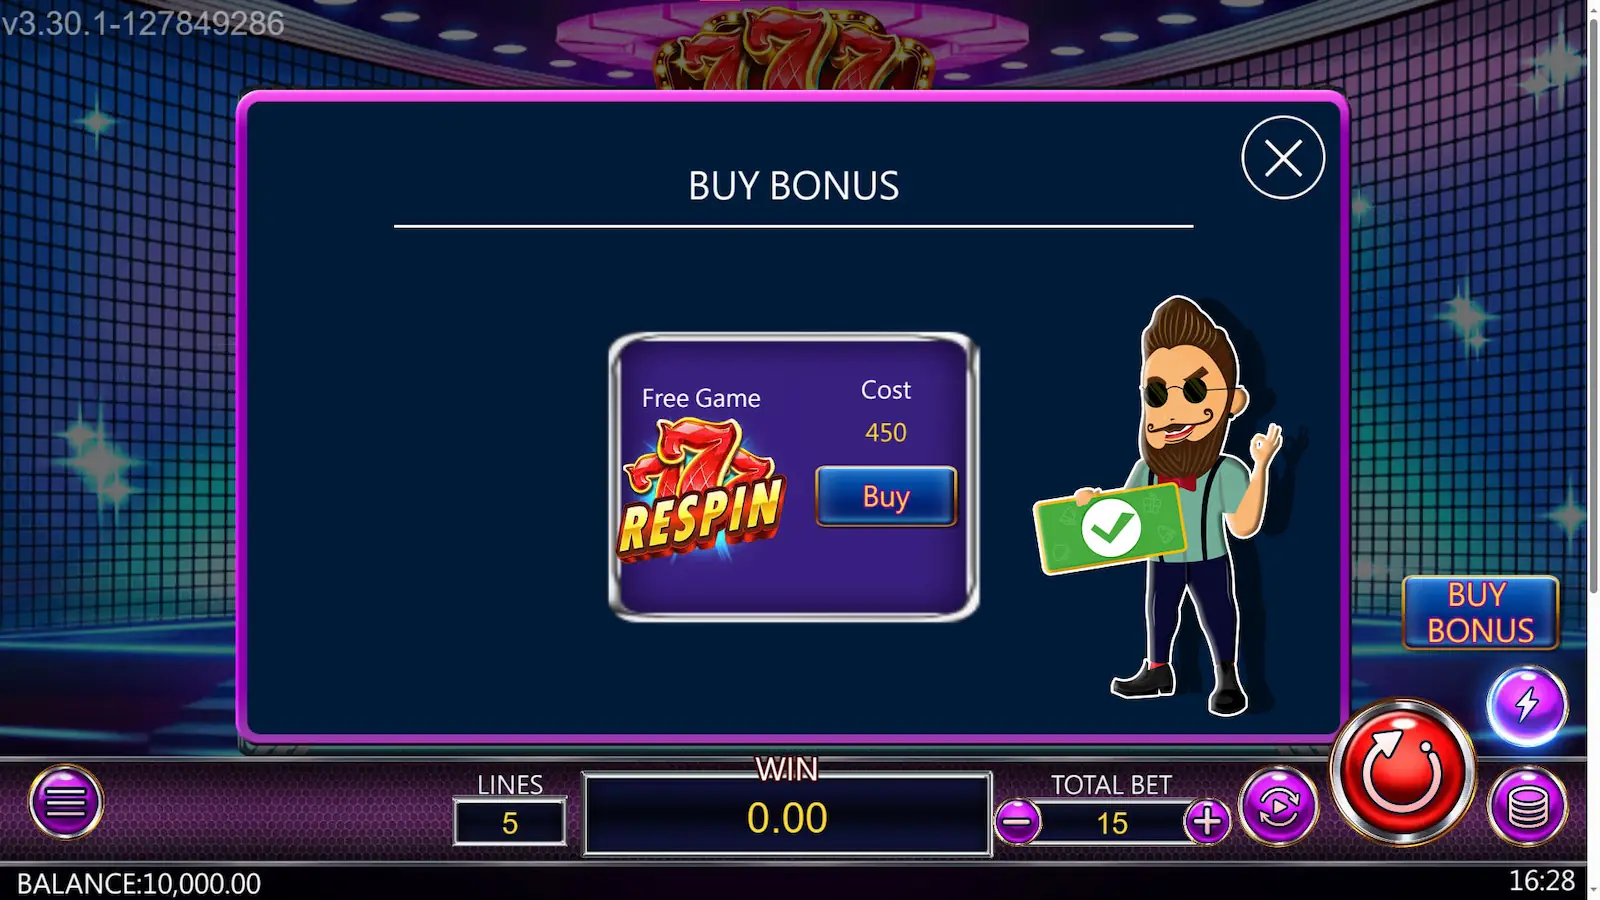 Tips & Tricks to Play 777 Slot